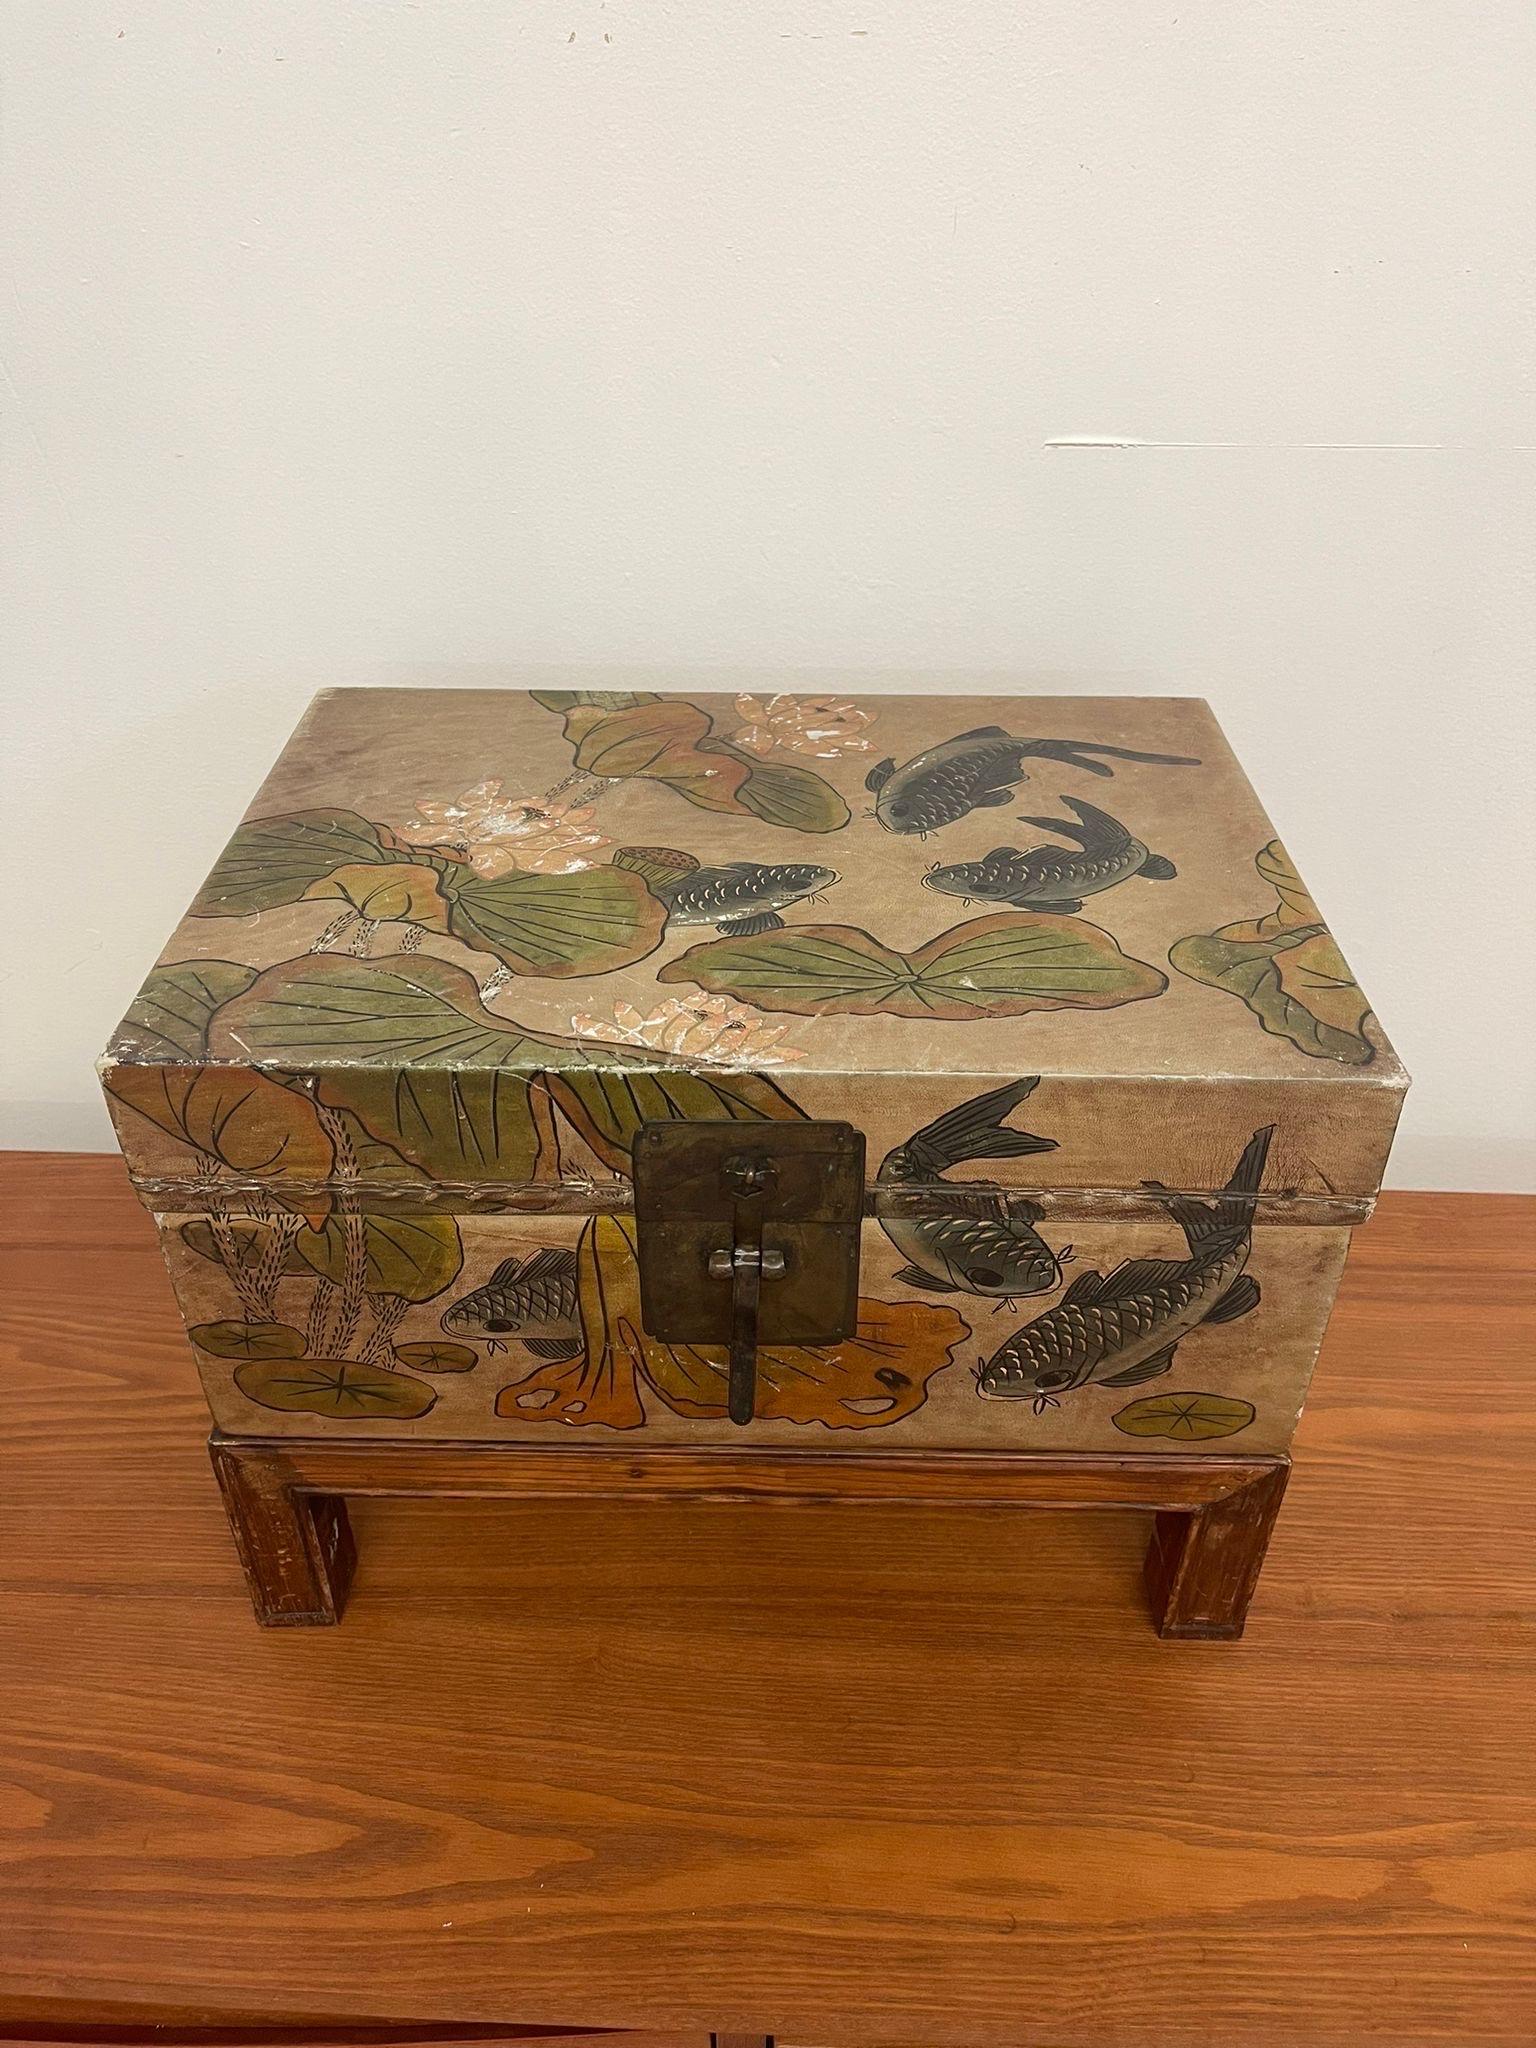 This Box Features Unique Hardware and Kai Pond Decorative Art. The Box and the Stand are One Piece , non Removable. Vintage Condition Consistent with Age as Pictured.

Dimensions. 17 W ; 12 D ; 12 H